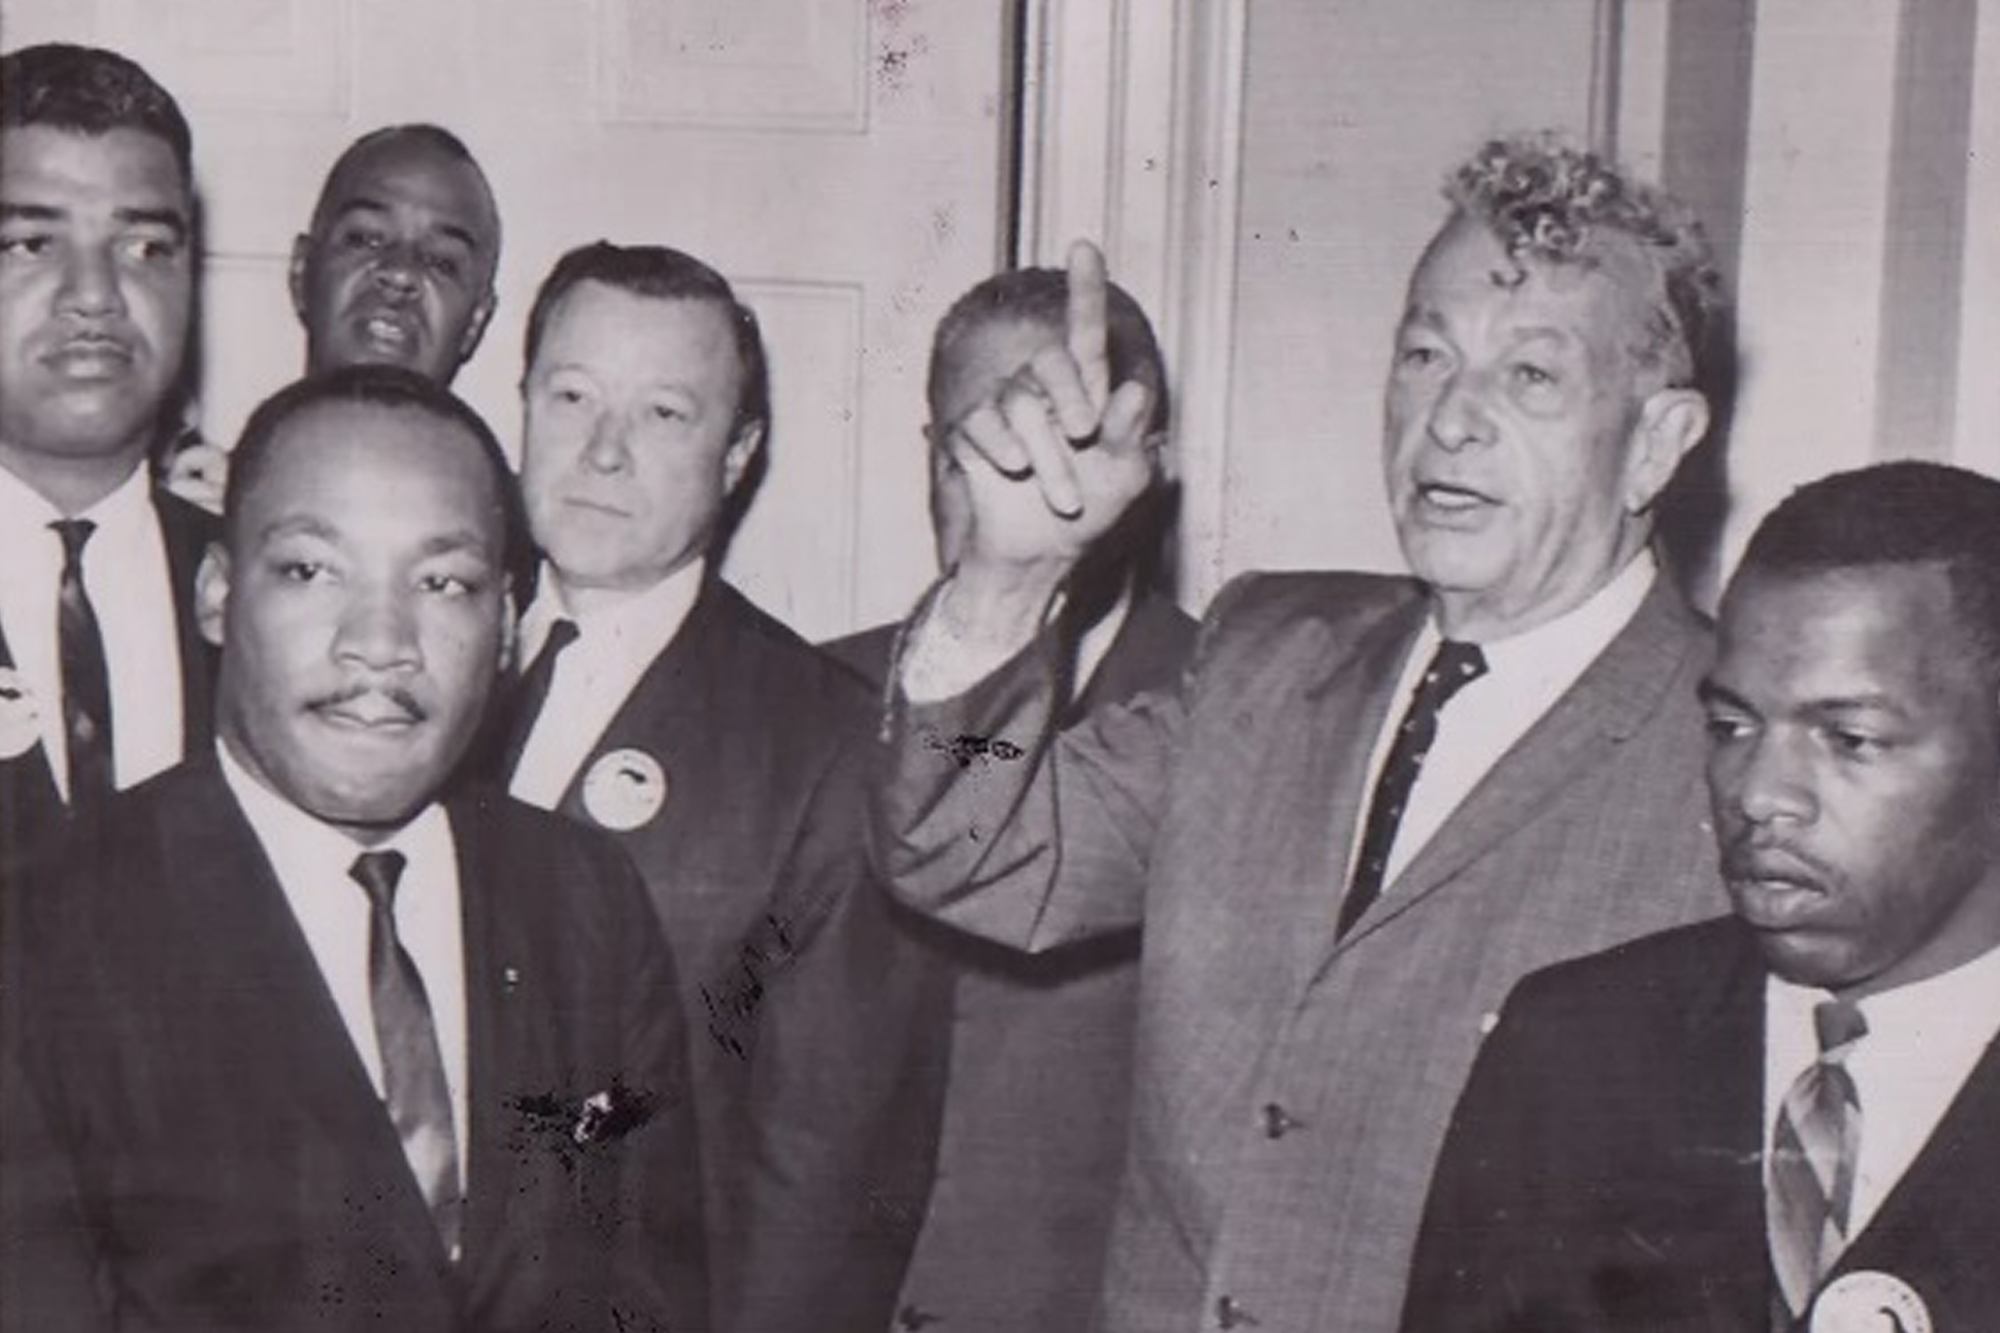 Sen. Everett McKinley Dirksen of Pekin is shown with Civil Rights Movement leaders Rev. Martin Luther King Jr., Roy Wilkins, John Lewis and others